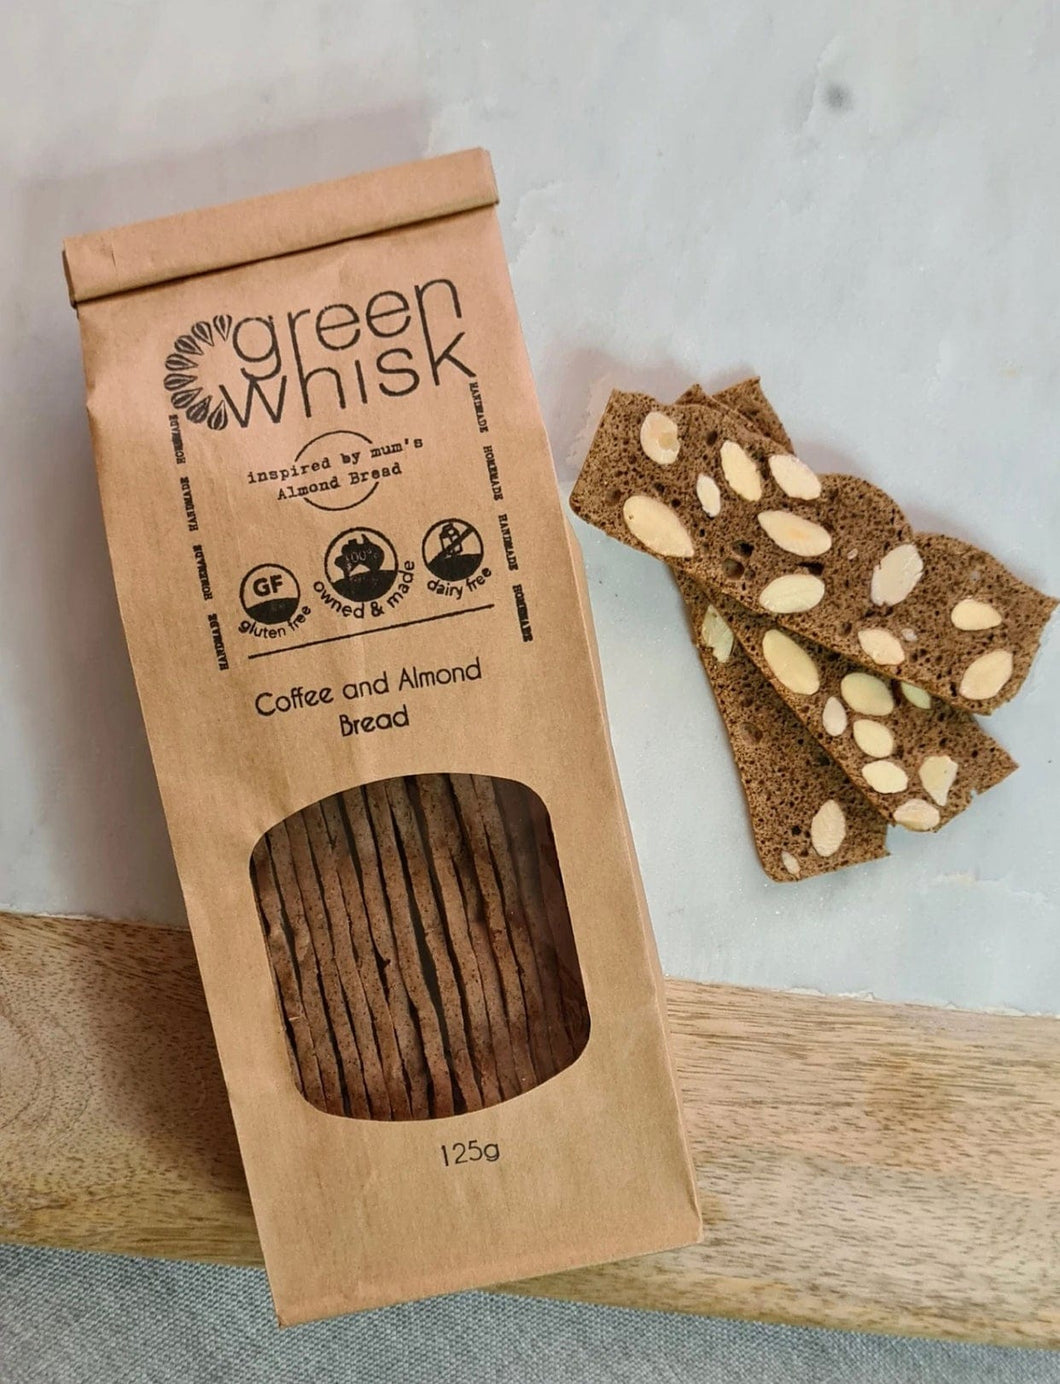 Green Whisk- Coffee and Almond, Almond Bread